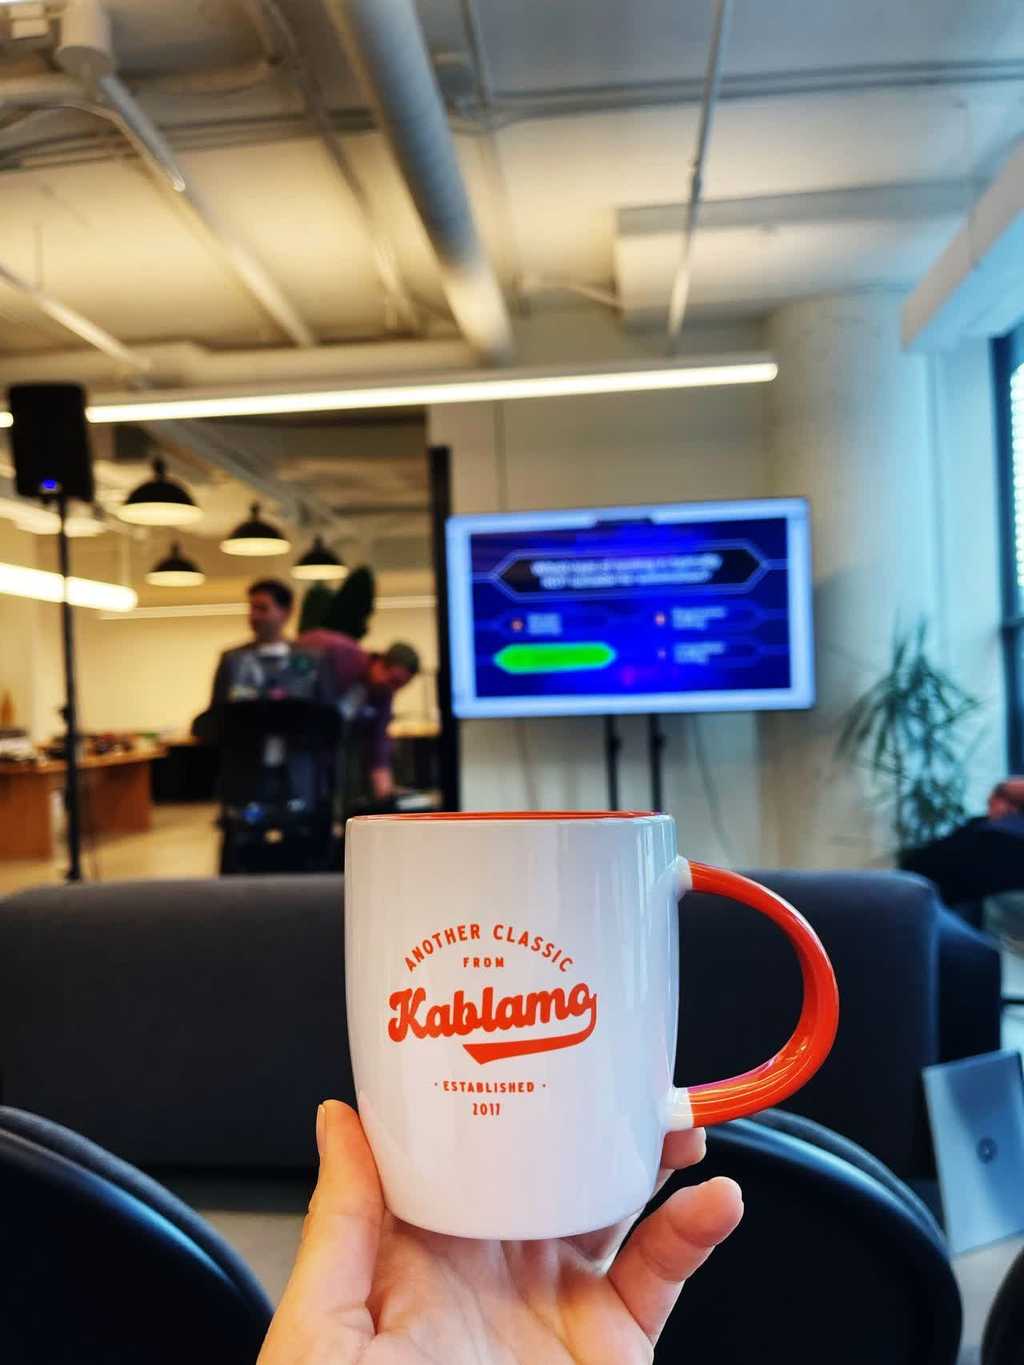 Image showing kablamo coffee mug given to a attendee as a prize for answering a quiz correctly